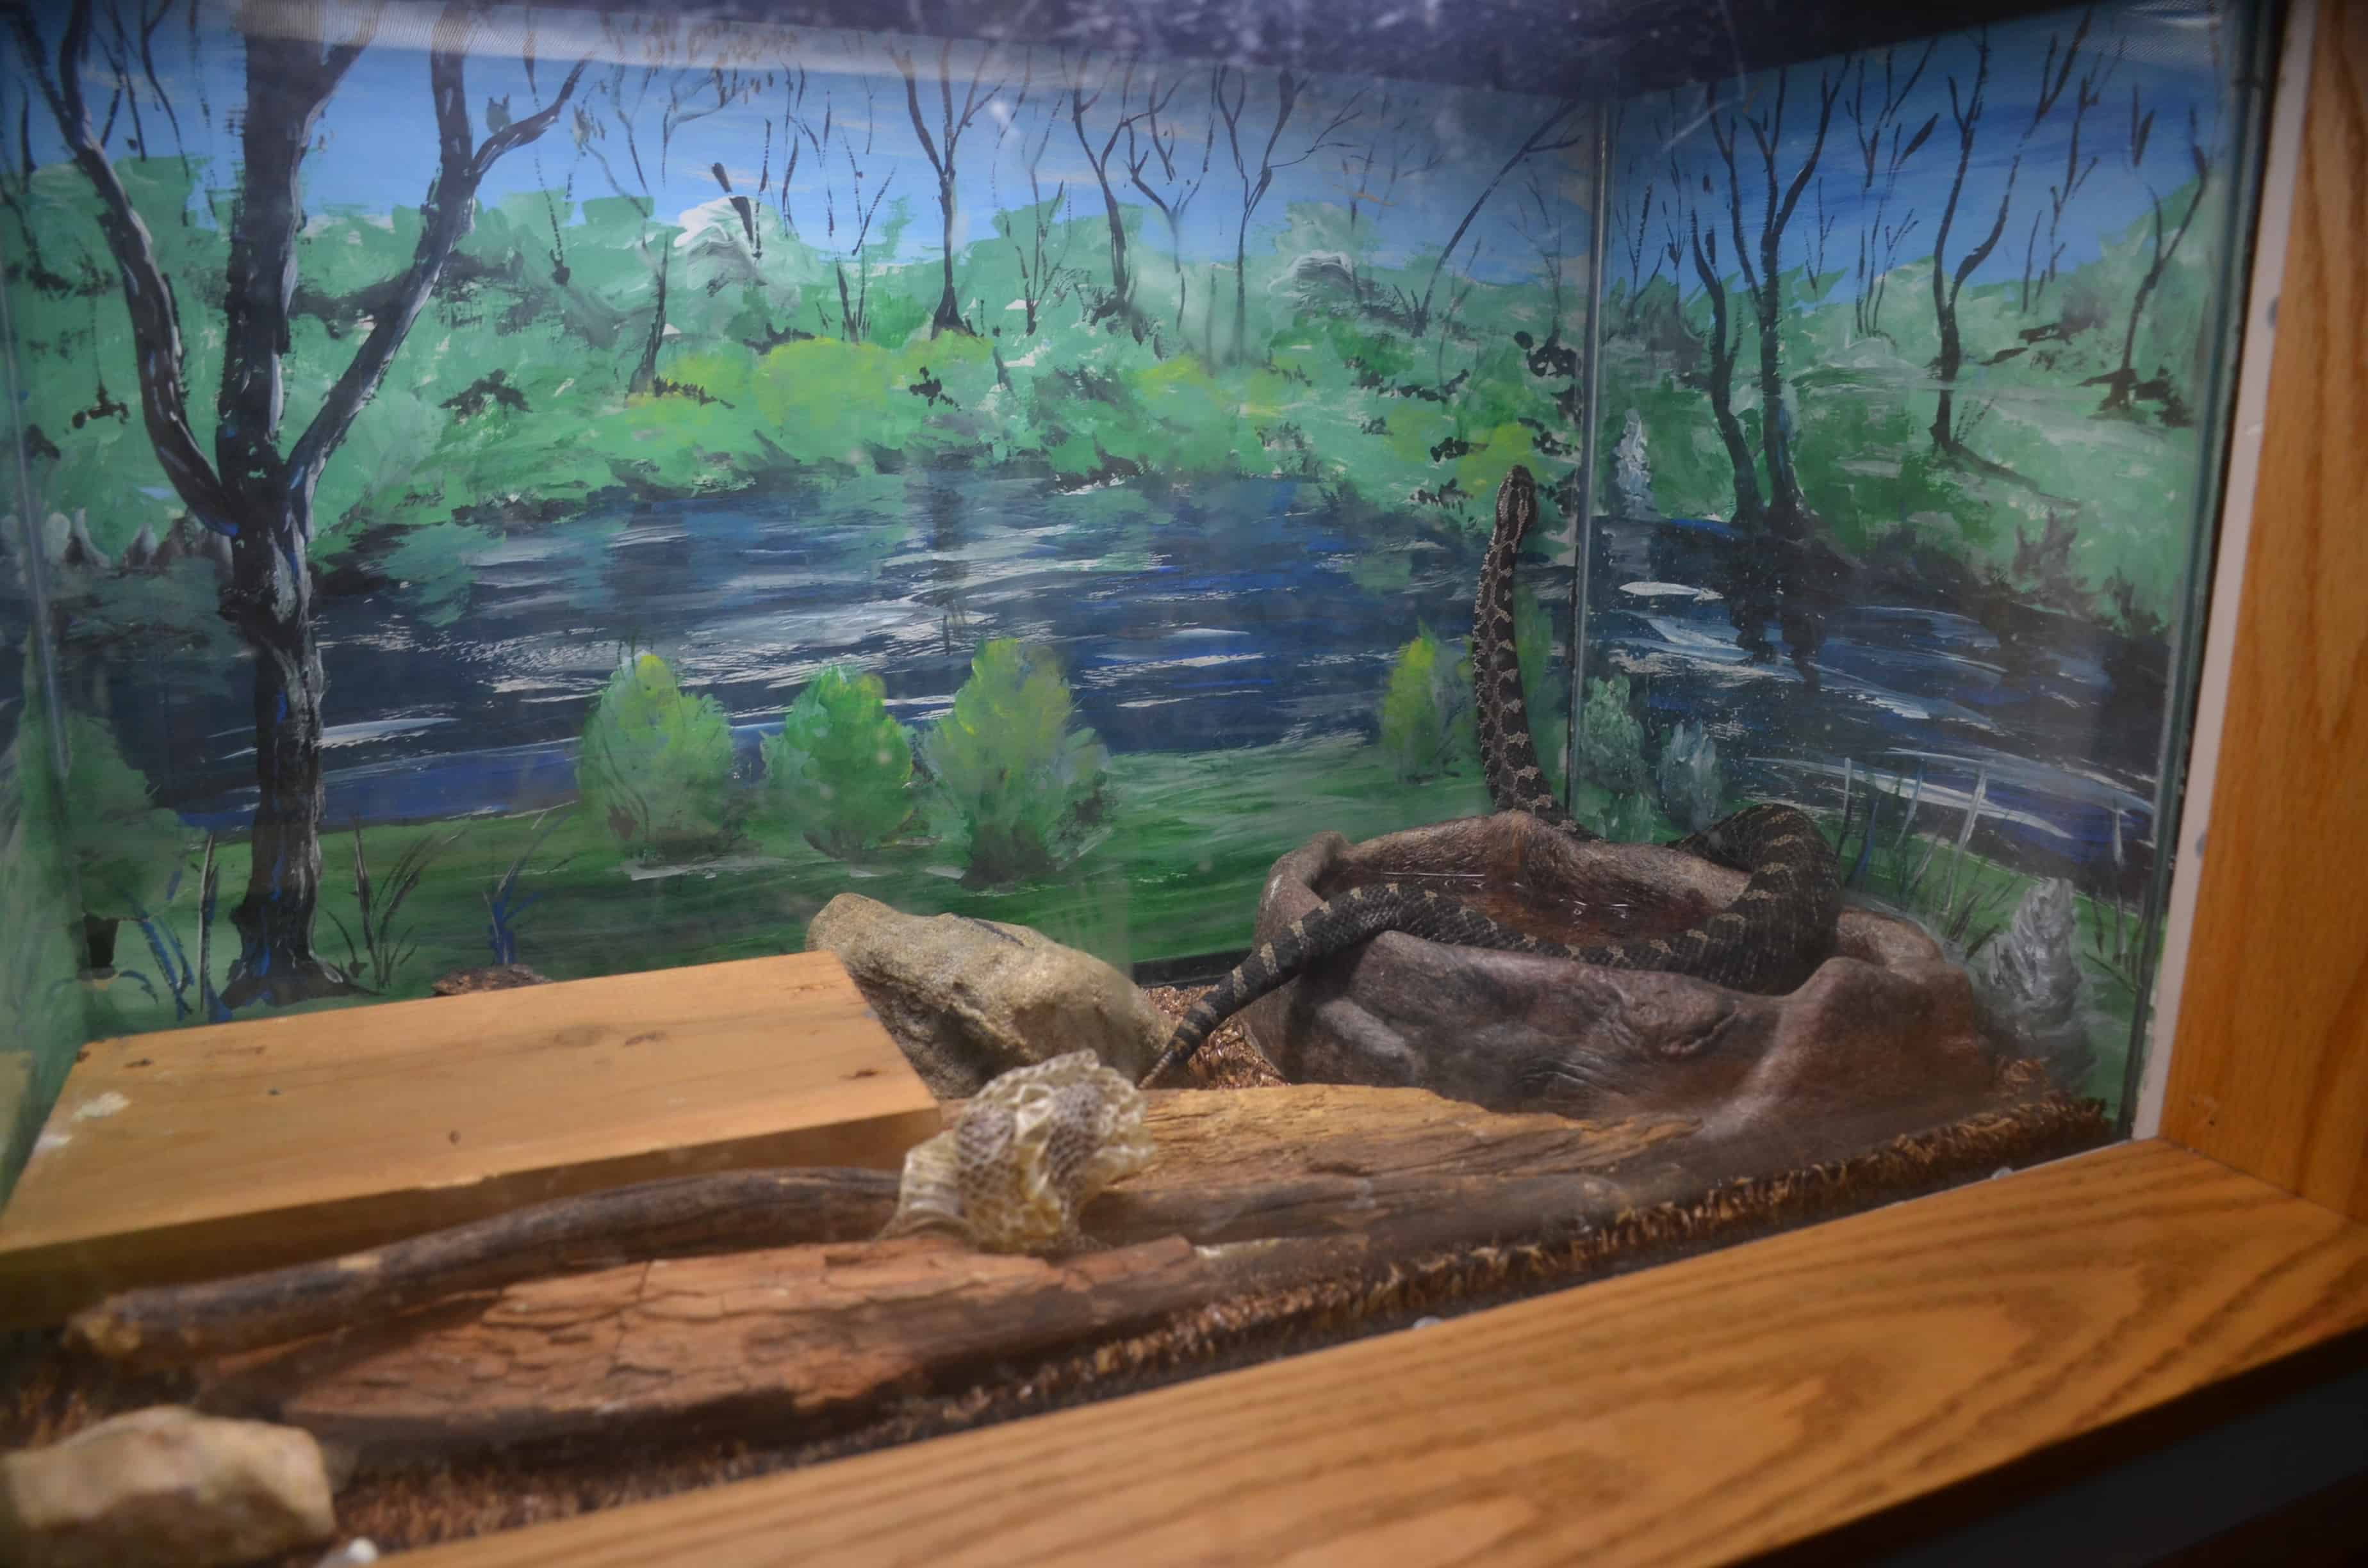 Snakes in the Nature Center